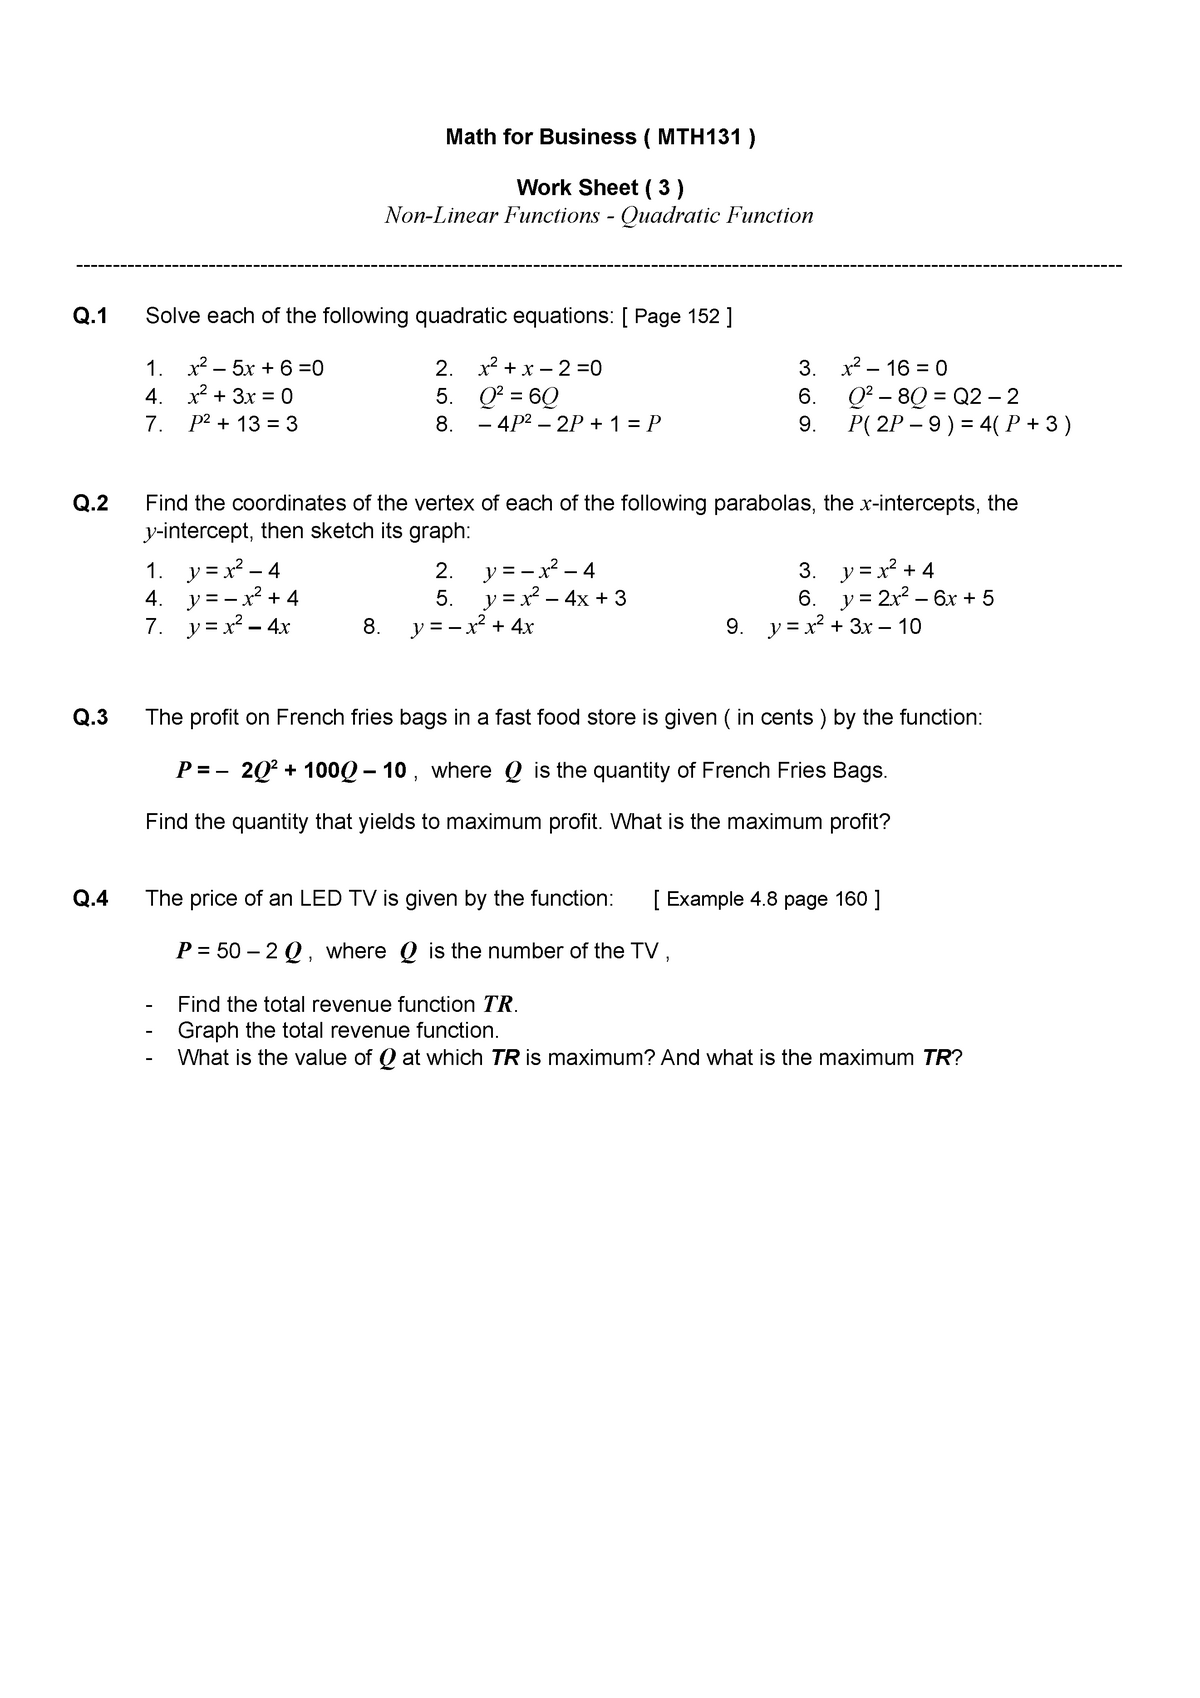 Work Sheet 03 Chapter 3 Math For Business Mth131 Work Sheet 3 Non Linear Functions Studocu